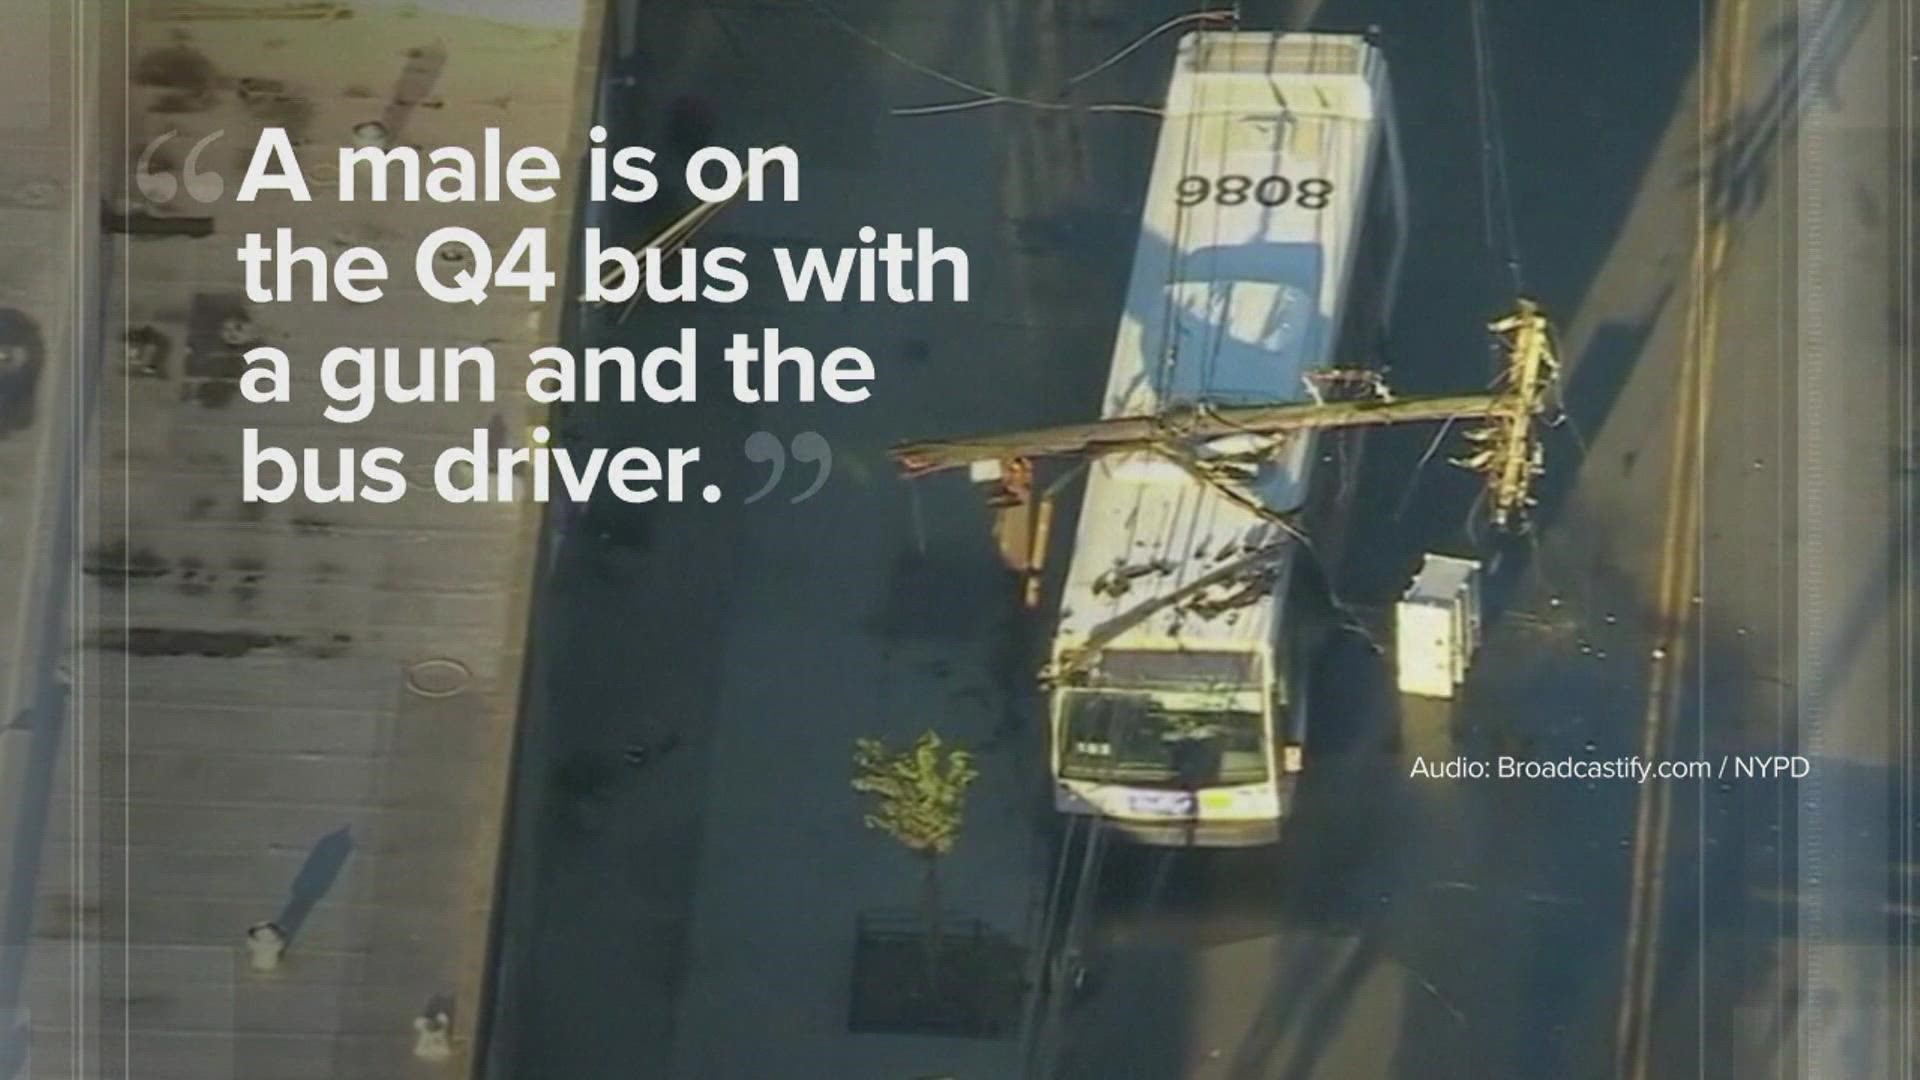 The bus driver allowed passengers to escape during the incident.